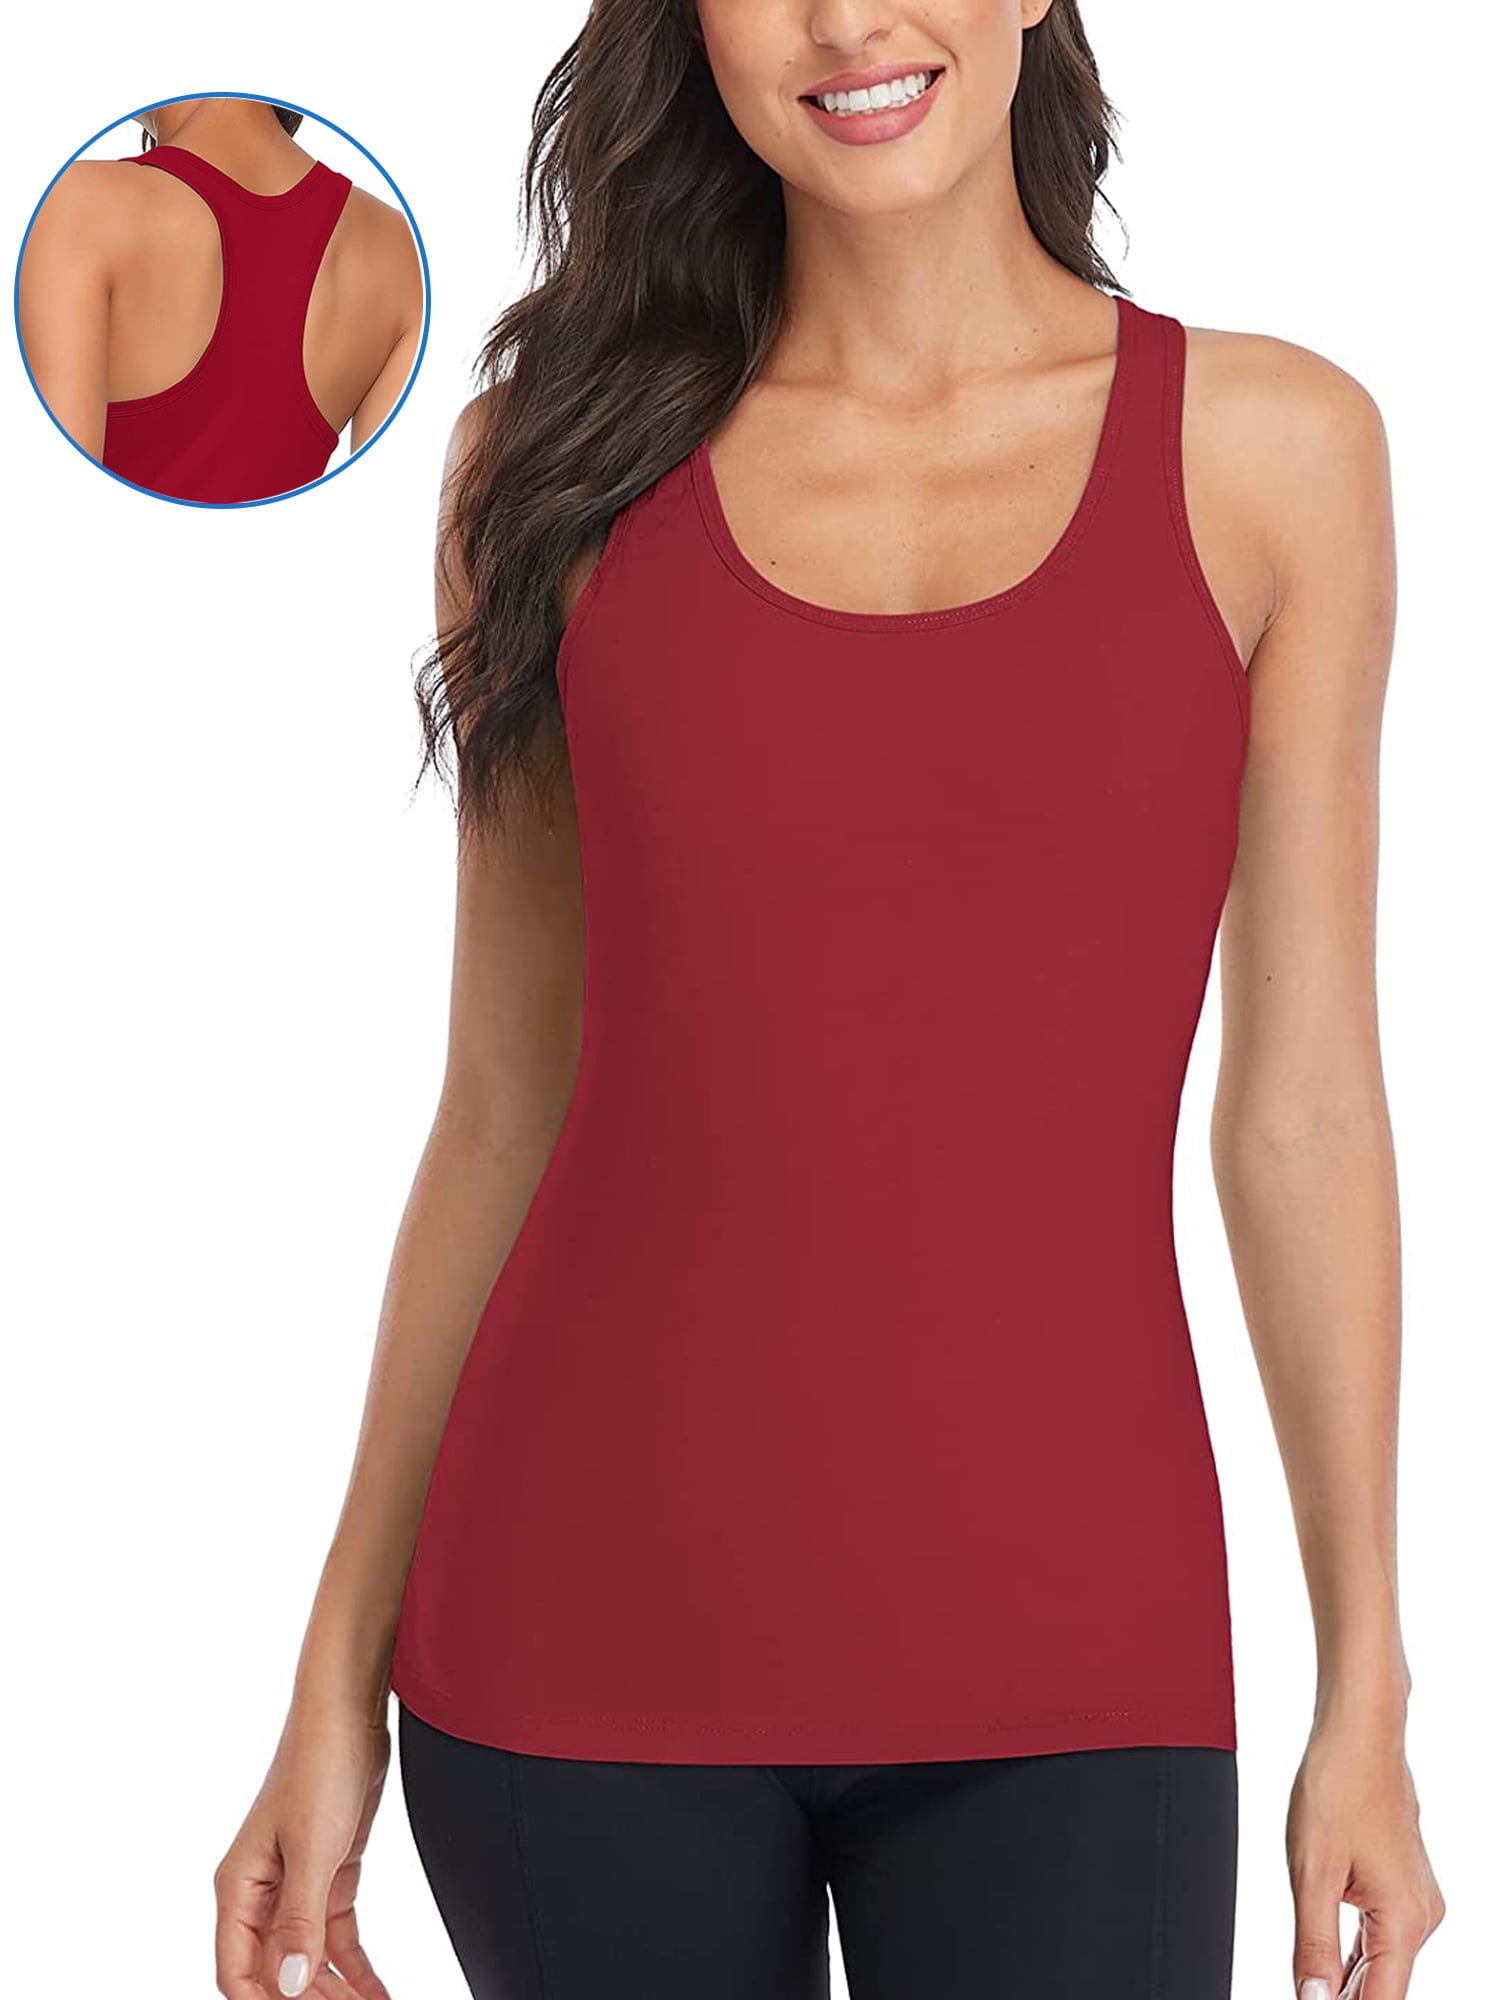 MNBCCXC Slim Fitteed Tops For Women Camisole For Women Flowing Tank Tops  For Women Tank Tops For Teens Same Day Delivery Items Prime Under 10 Prime  Deals Of The Day Today Only